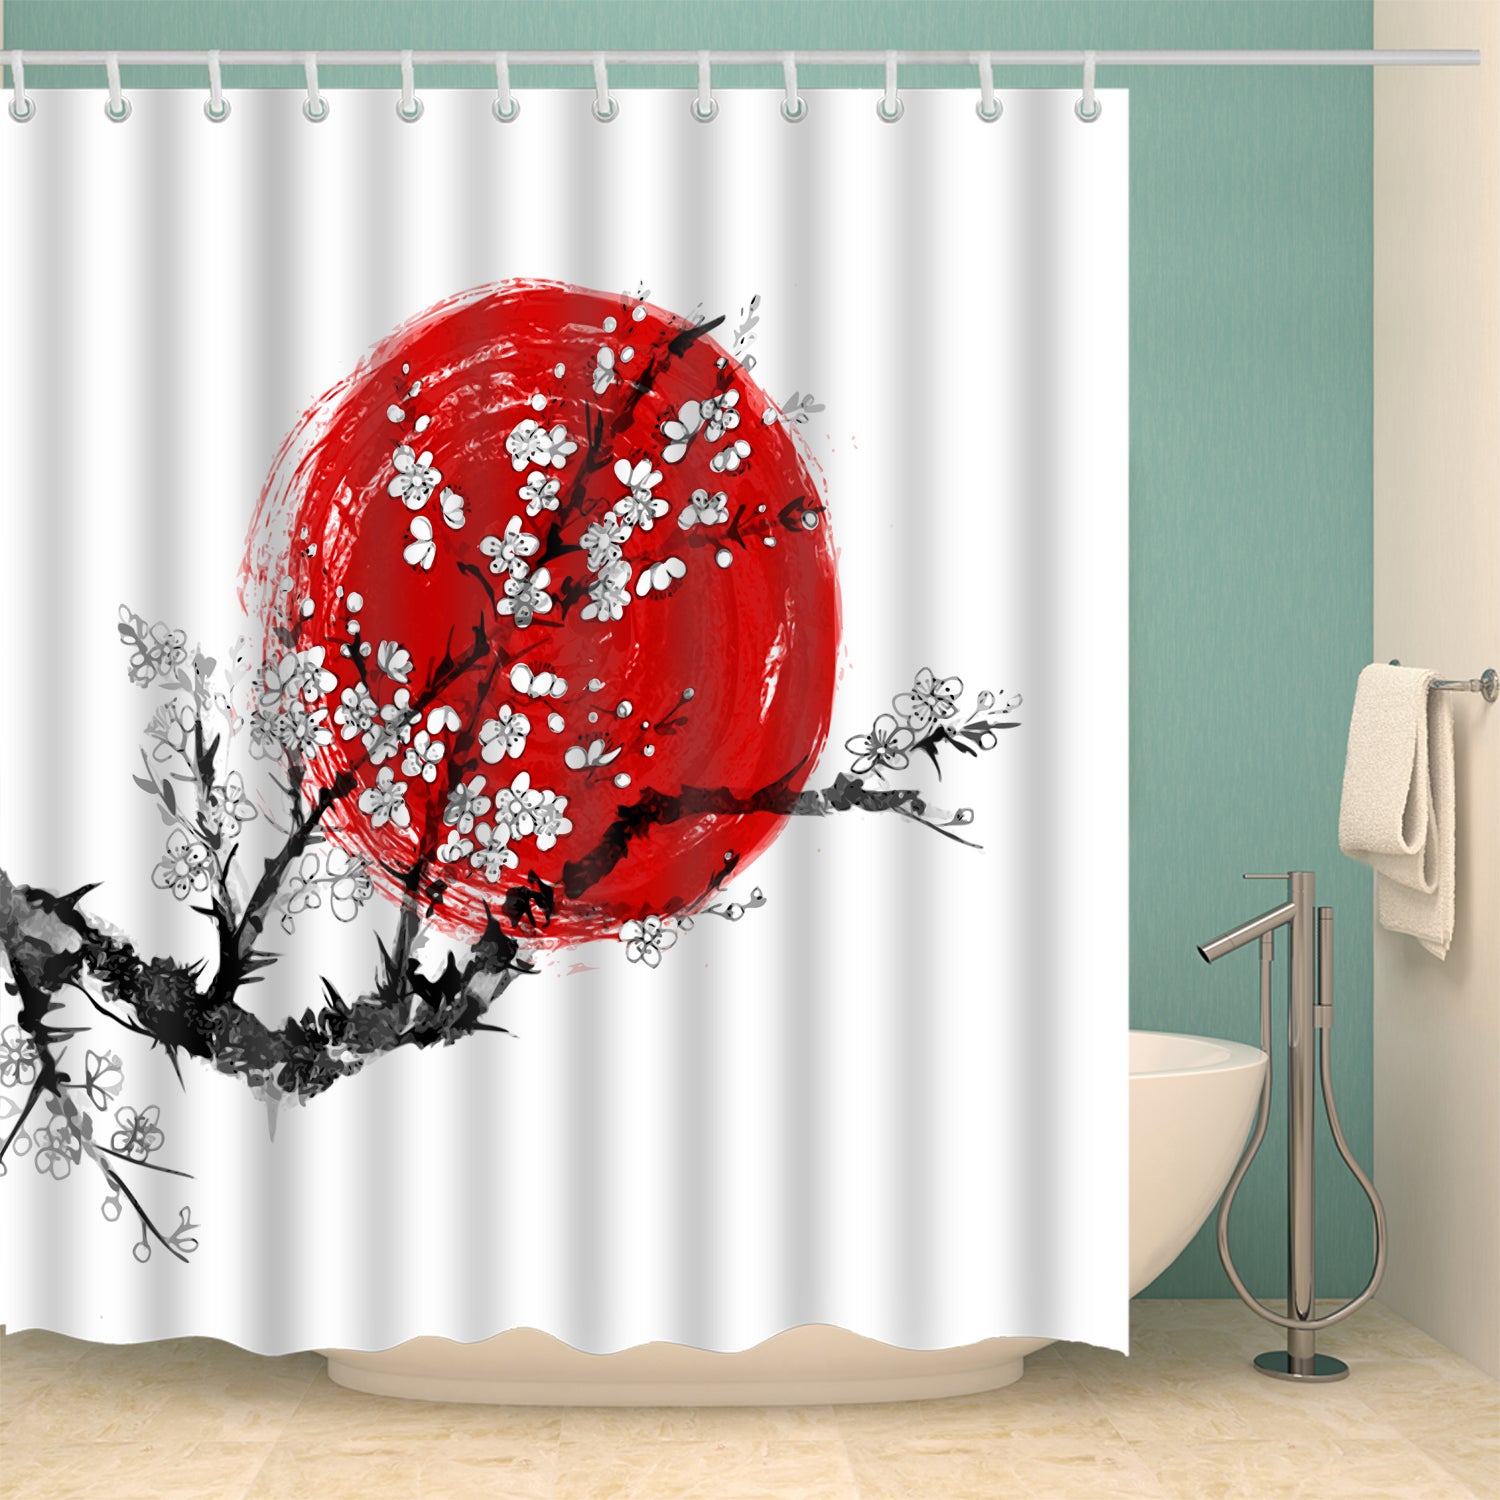 Red Sun with White Plum Bloosoms Flower Shower Curtain